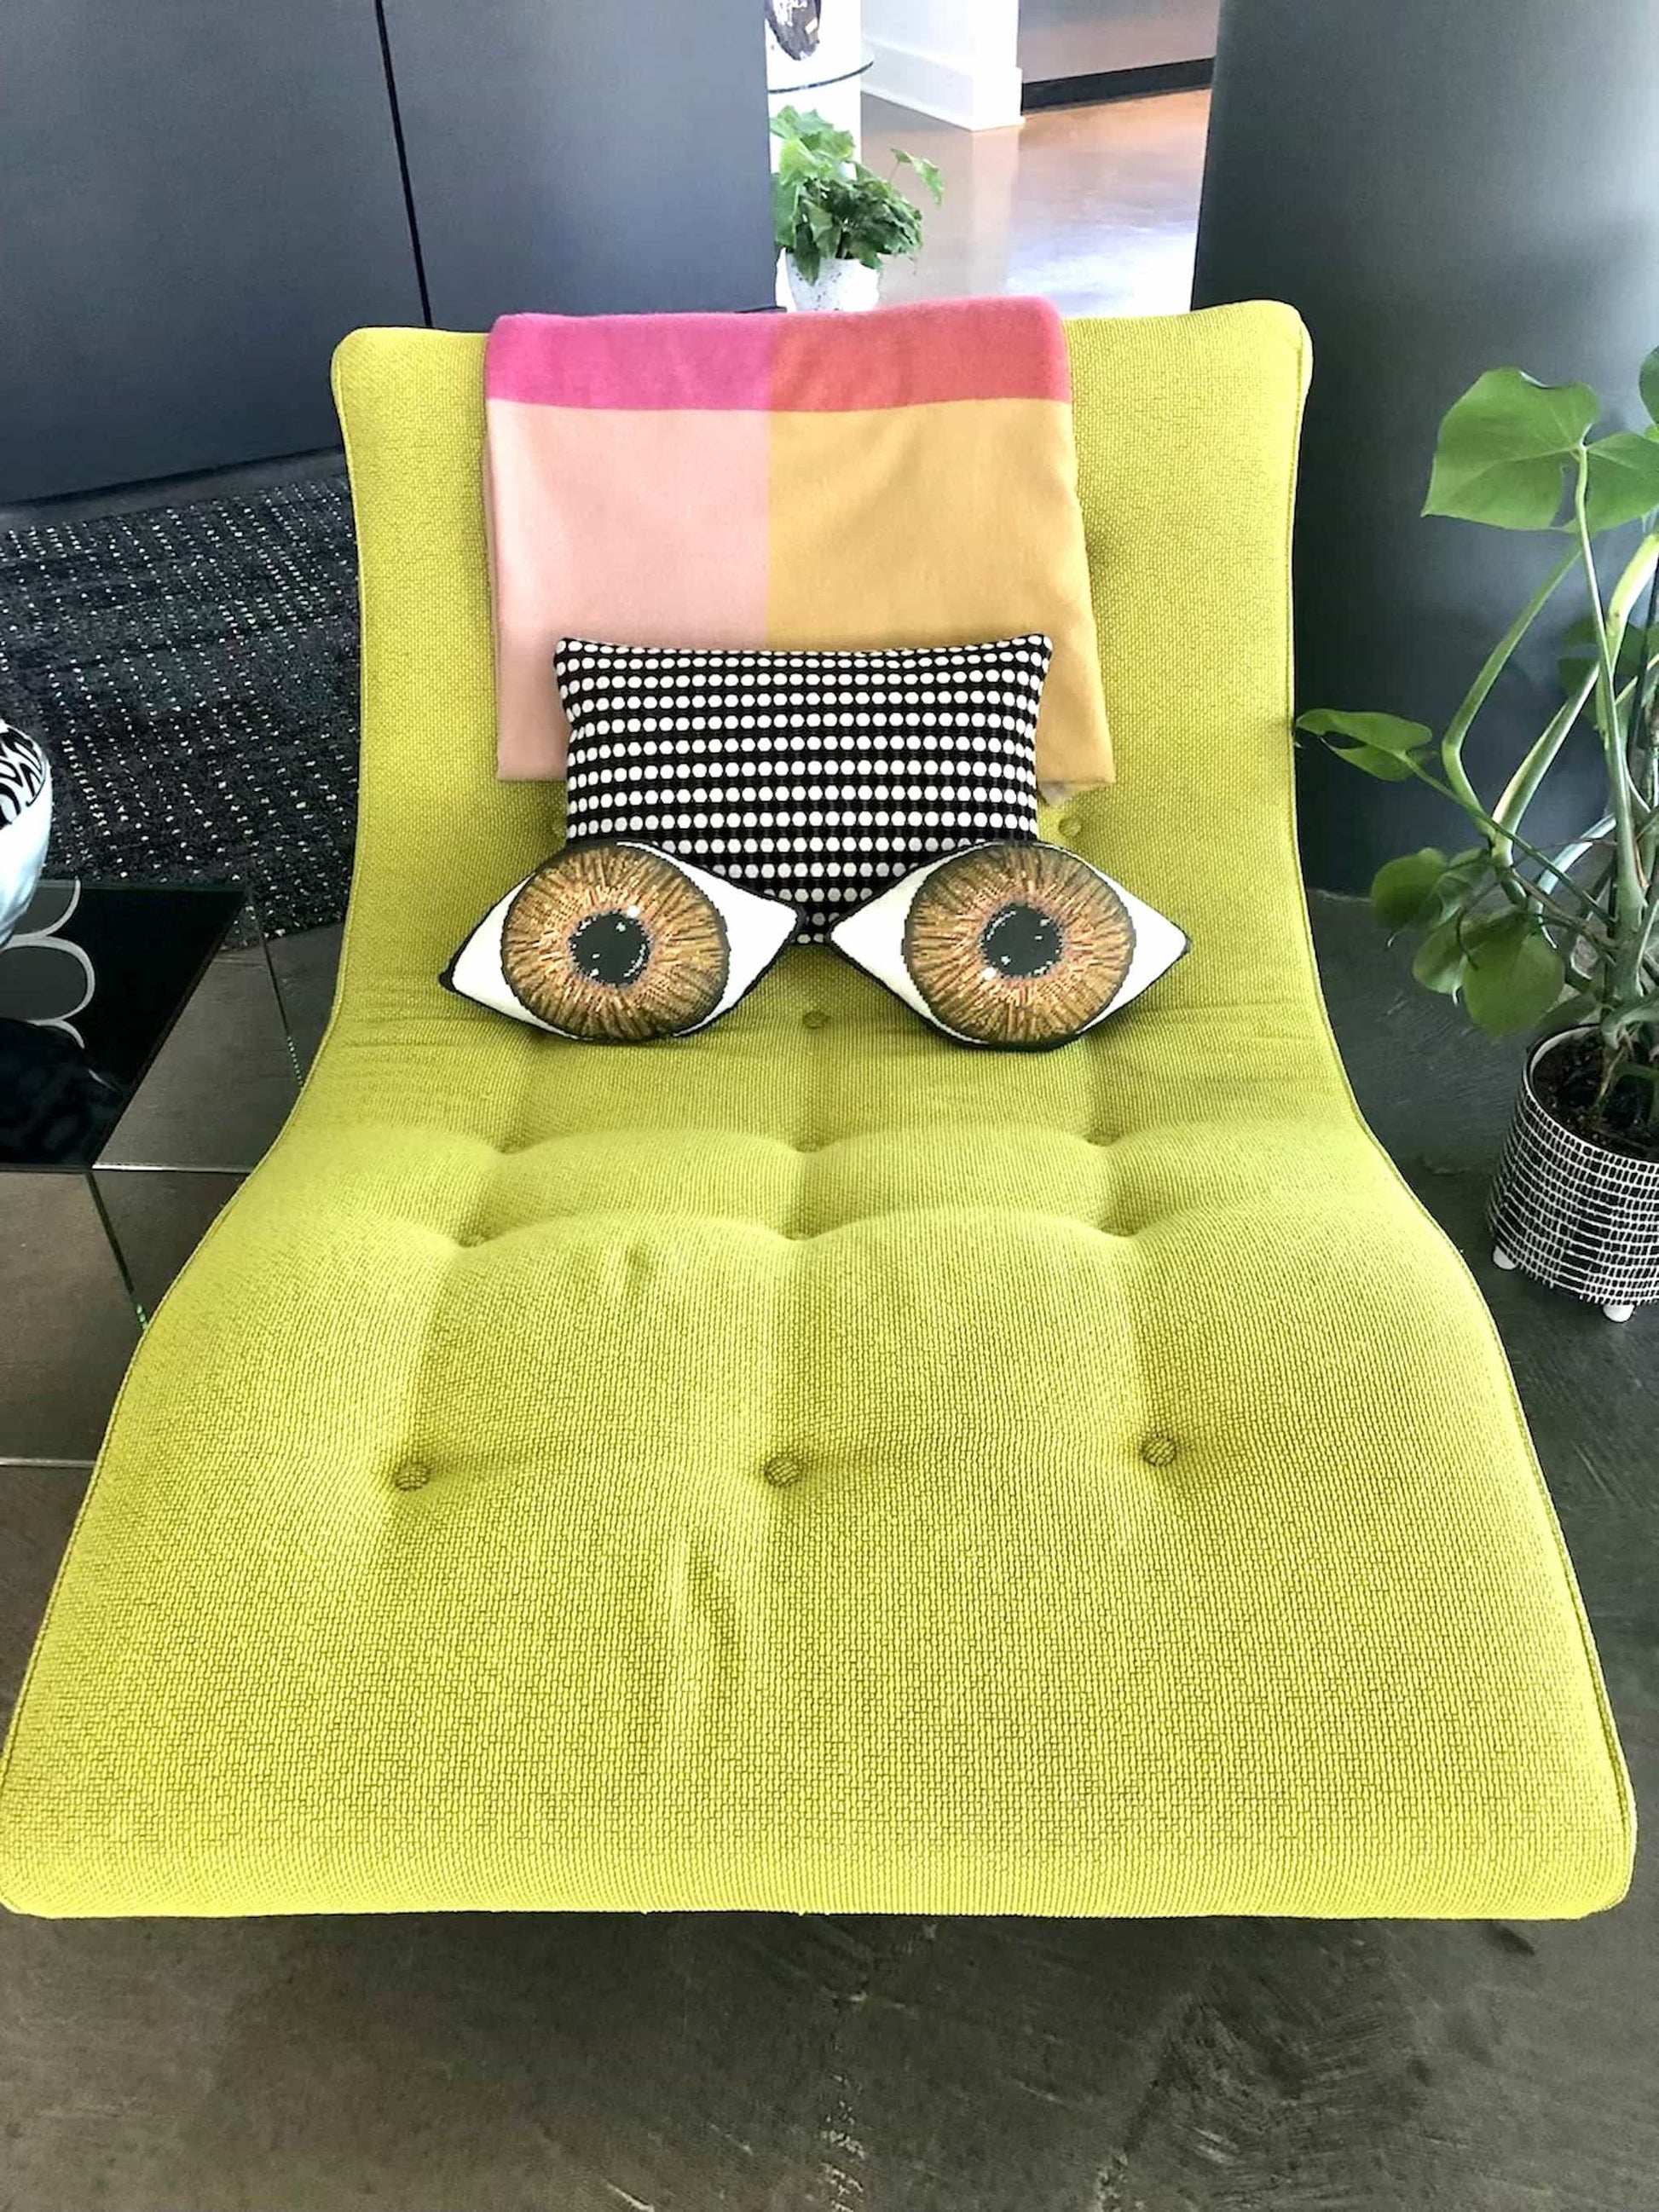 sculpted brown eye pillows shown on chartreuse chaise, Charlotte, NC